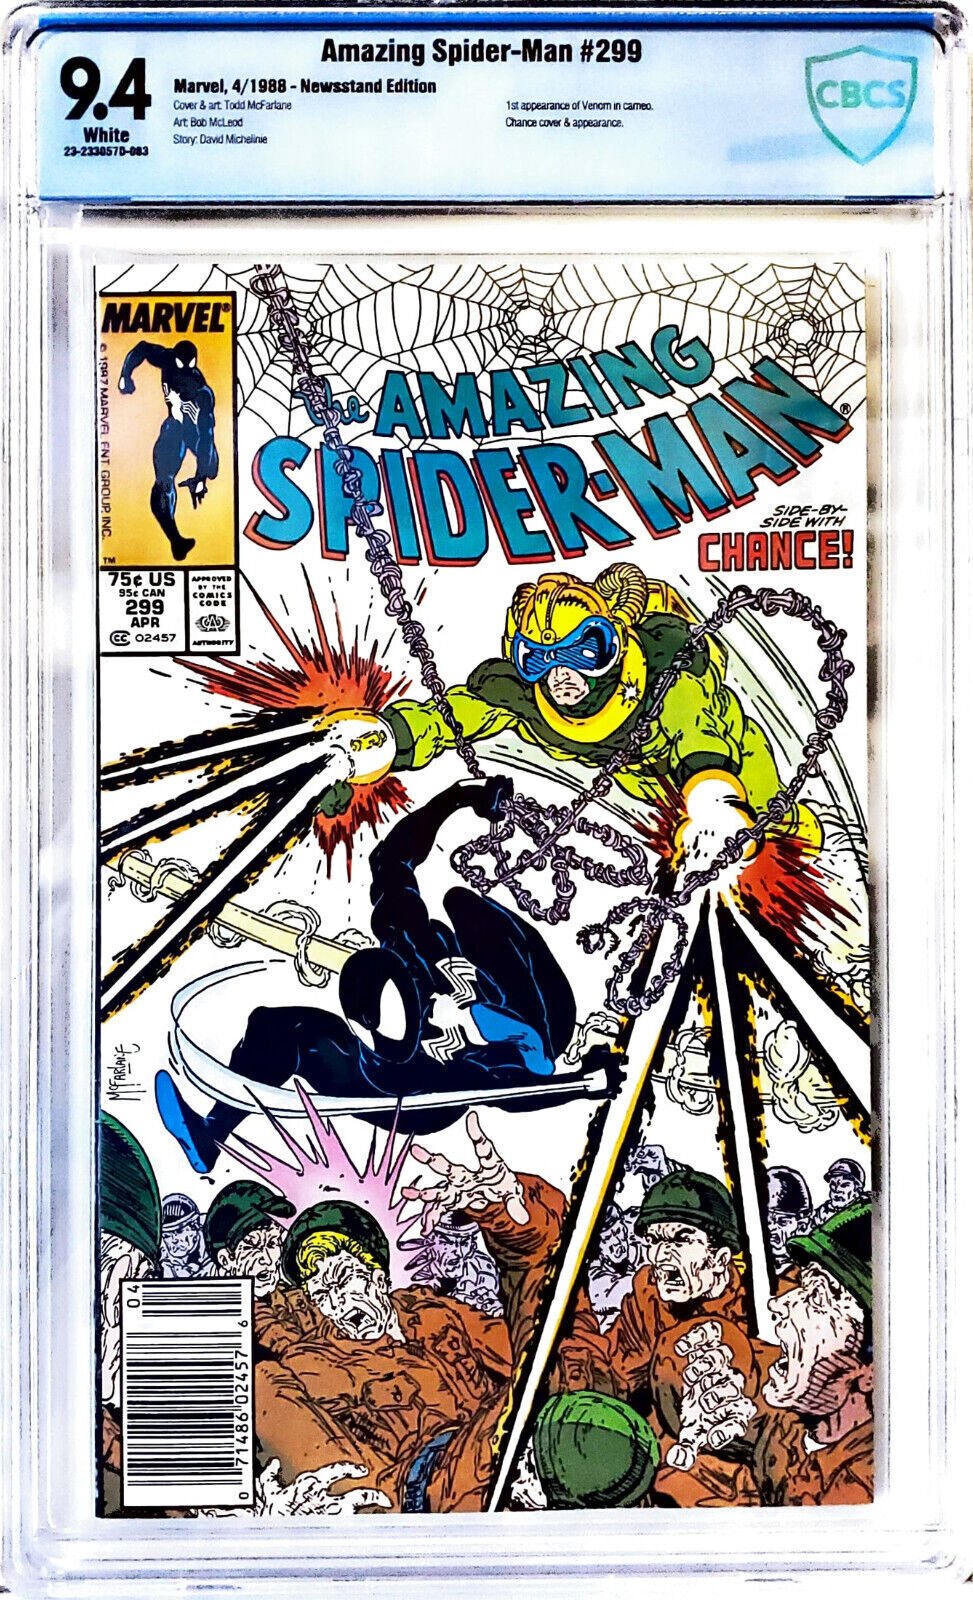 Amazing Spider-Man #299 CBCS 9.4 Comic Book Collectible Single Issue